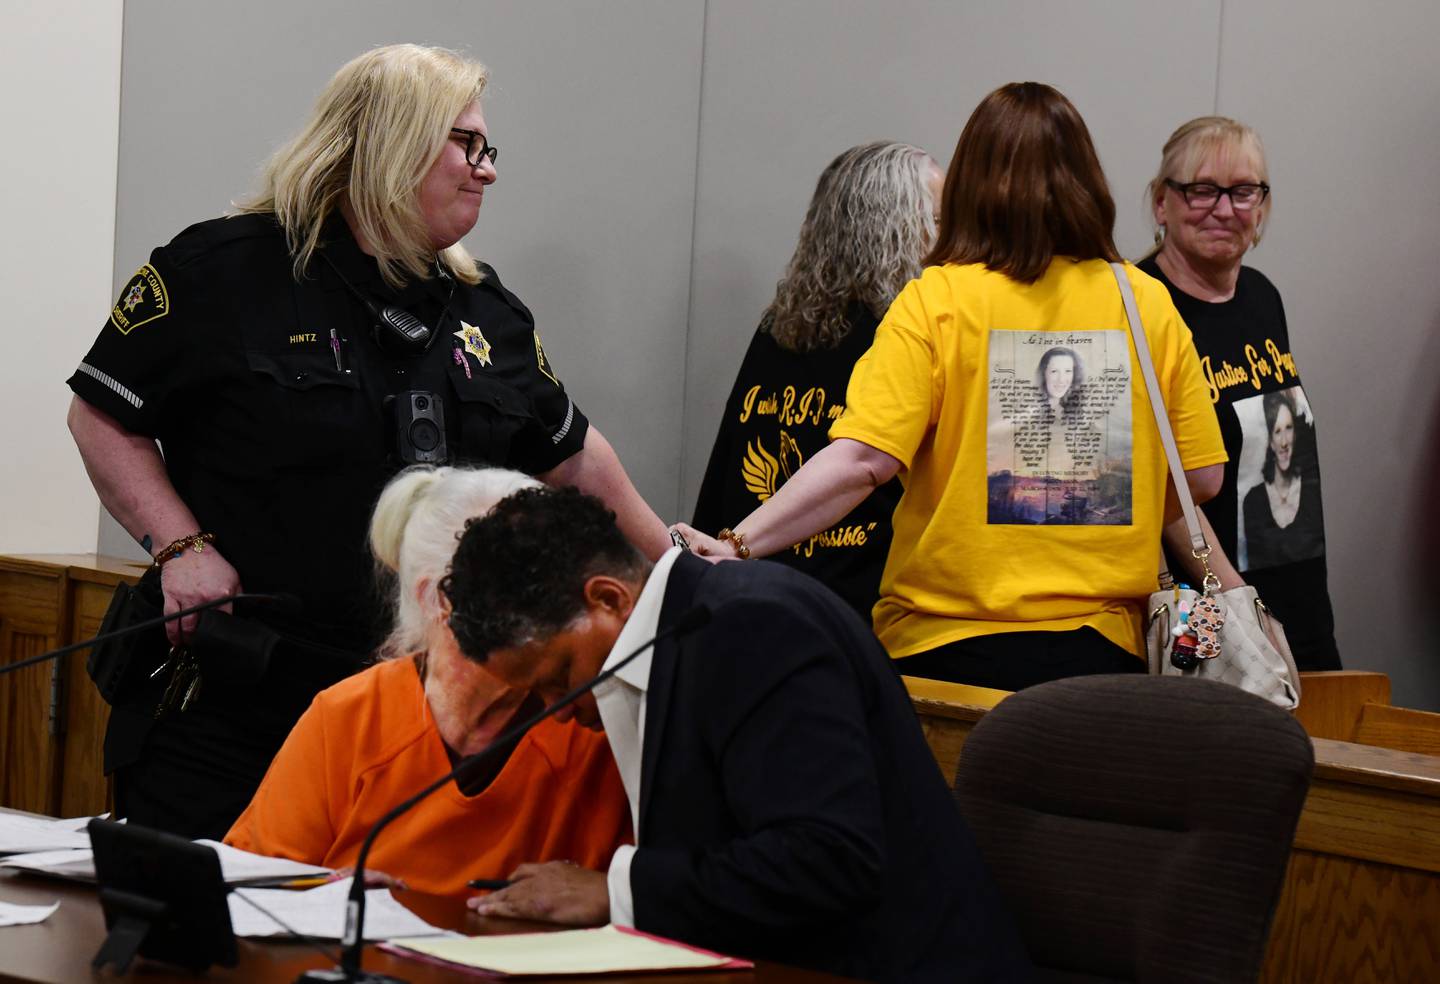 Relatives of Peggy Lynn Johnson-Schroeder walk behind Linda La Roche after La Roche was sentenced Monday May 23, 2022, in Racine County to life in prison without parole for the killing of Johnson-Schroeder in 1999 and a consecutive five-year sentence for concealing a corpse.